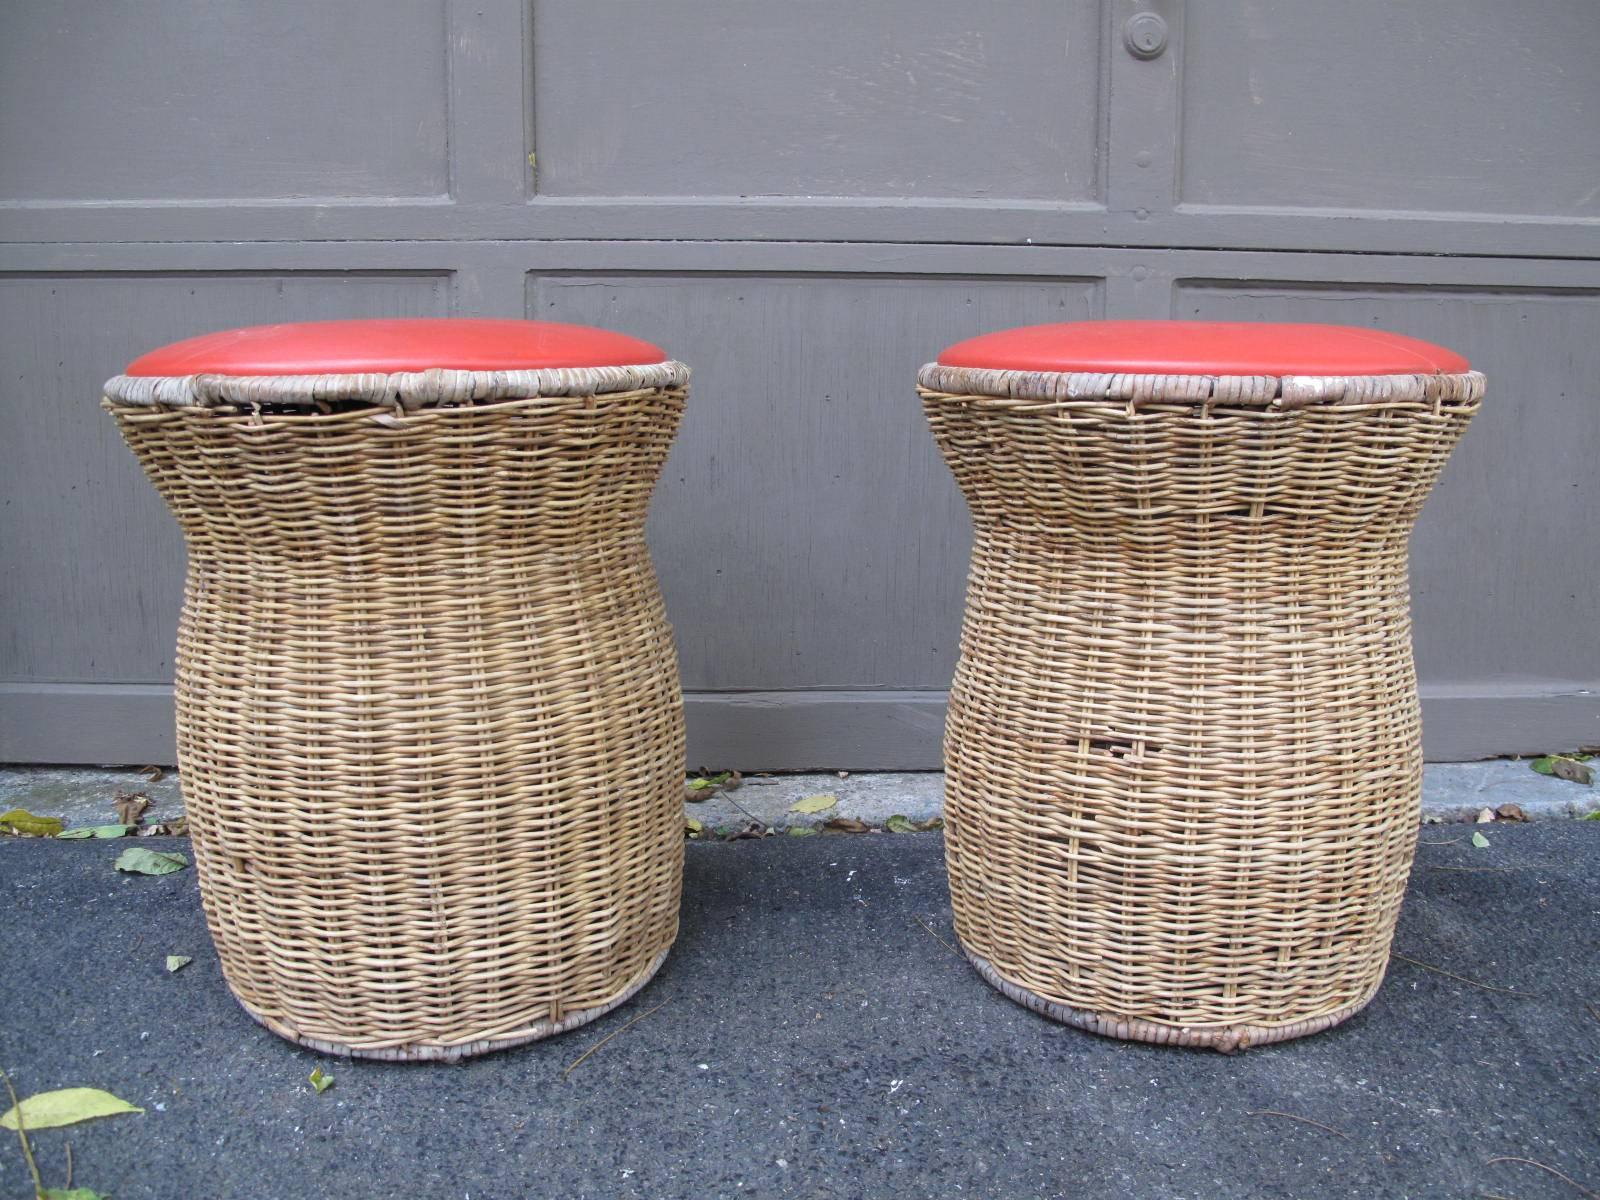 Calif-Asia wicker seats with red vinyl upholstery. Original tag on underside. Available as a pair.